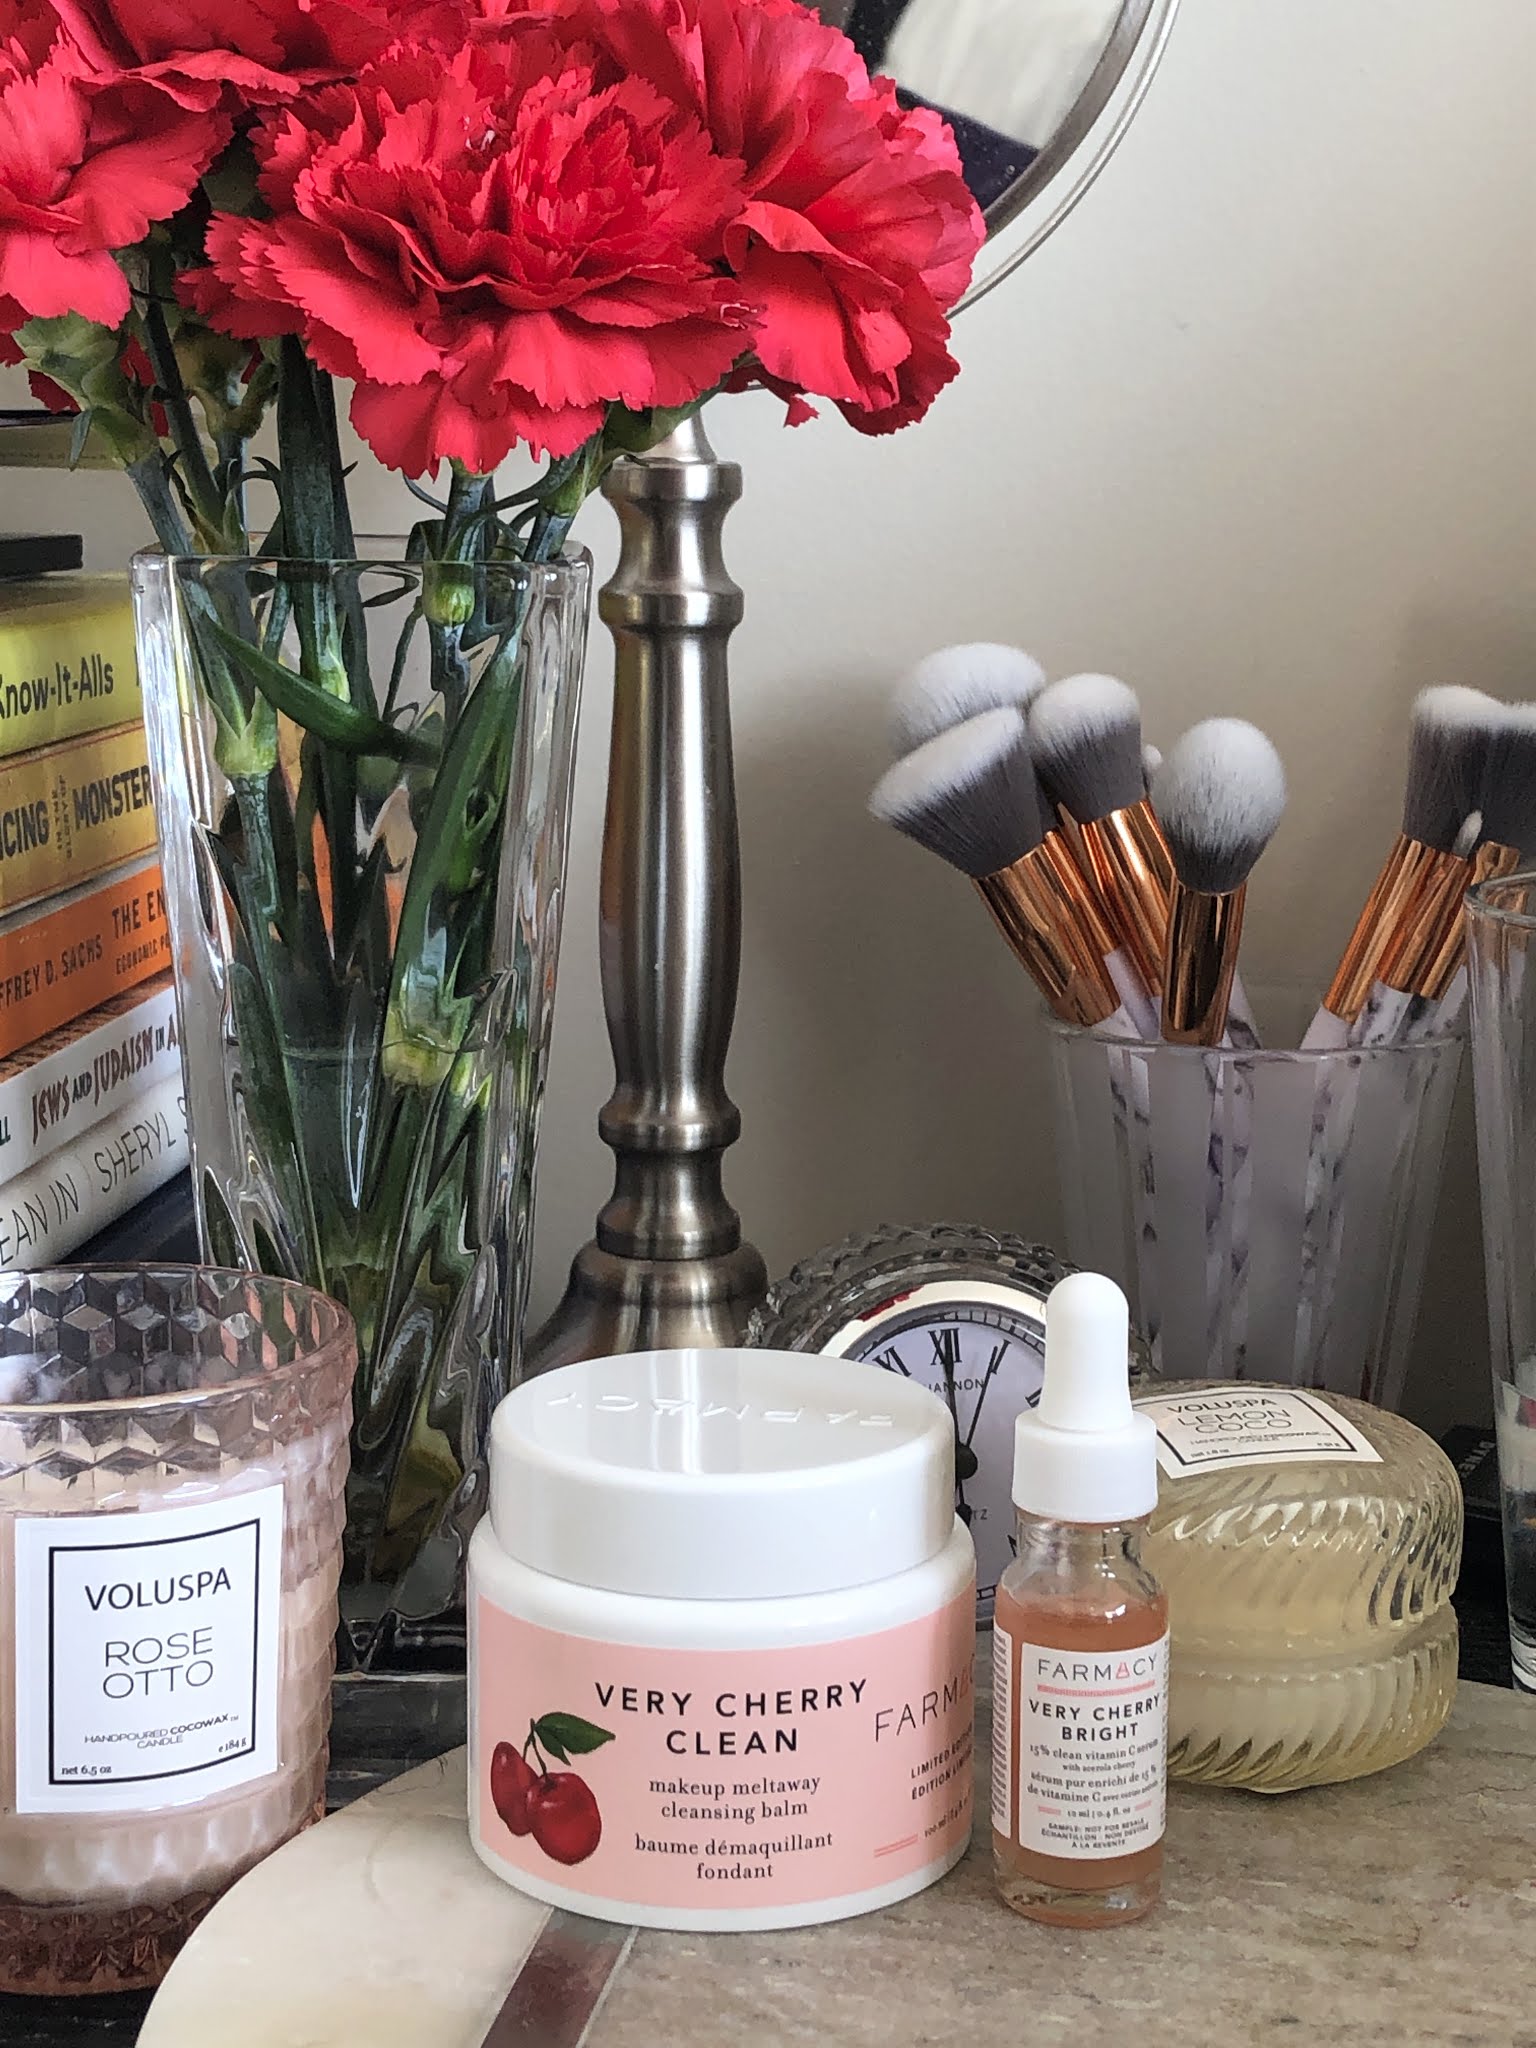 Farmacy Very Cherry Clean Cleansing Balm | bellanoirbeauty.com